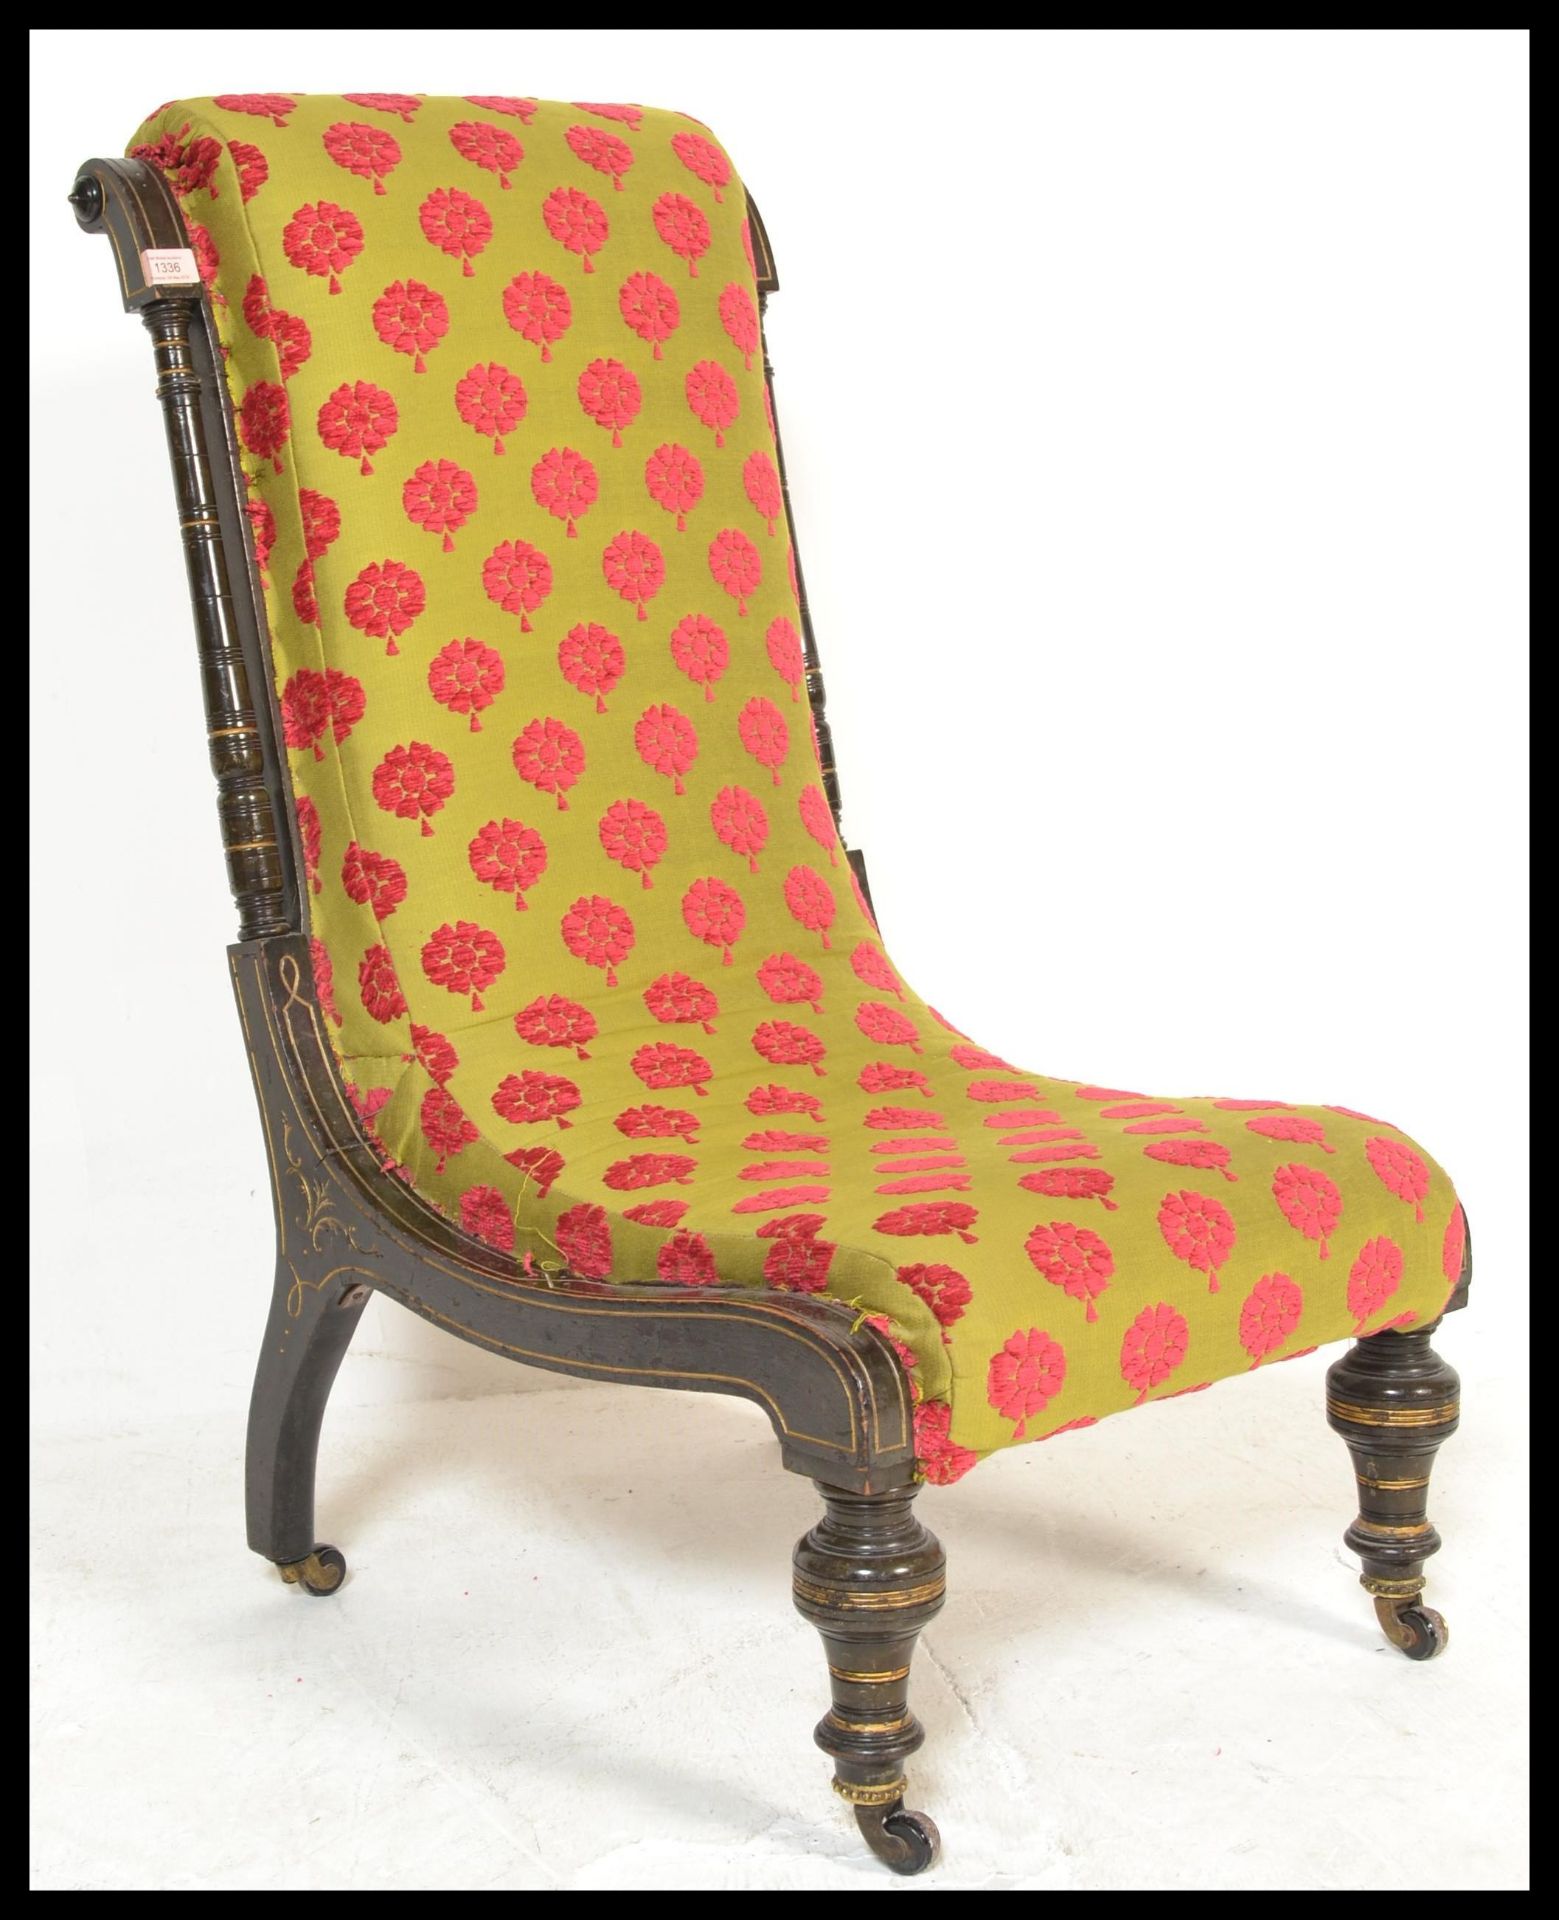 A 19th Century Victorian aesthetic movement nursing chair the wooden frame having decorative inlay